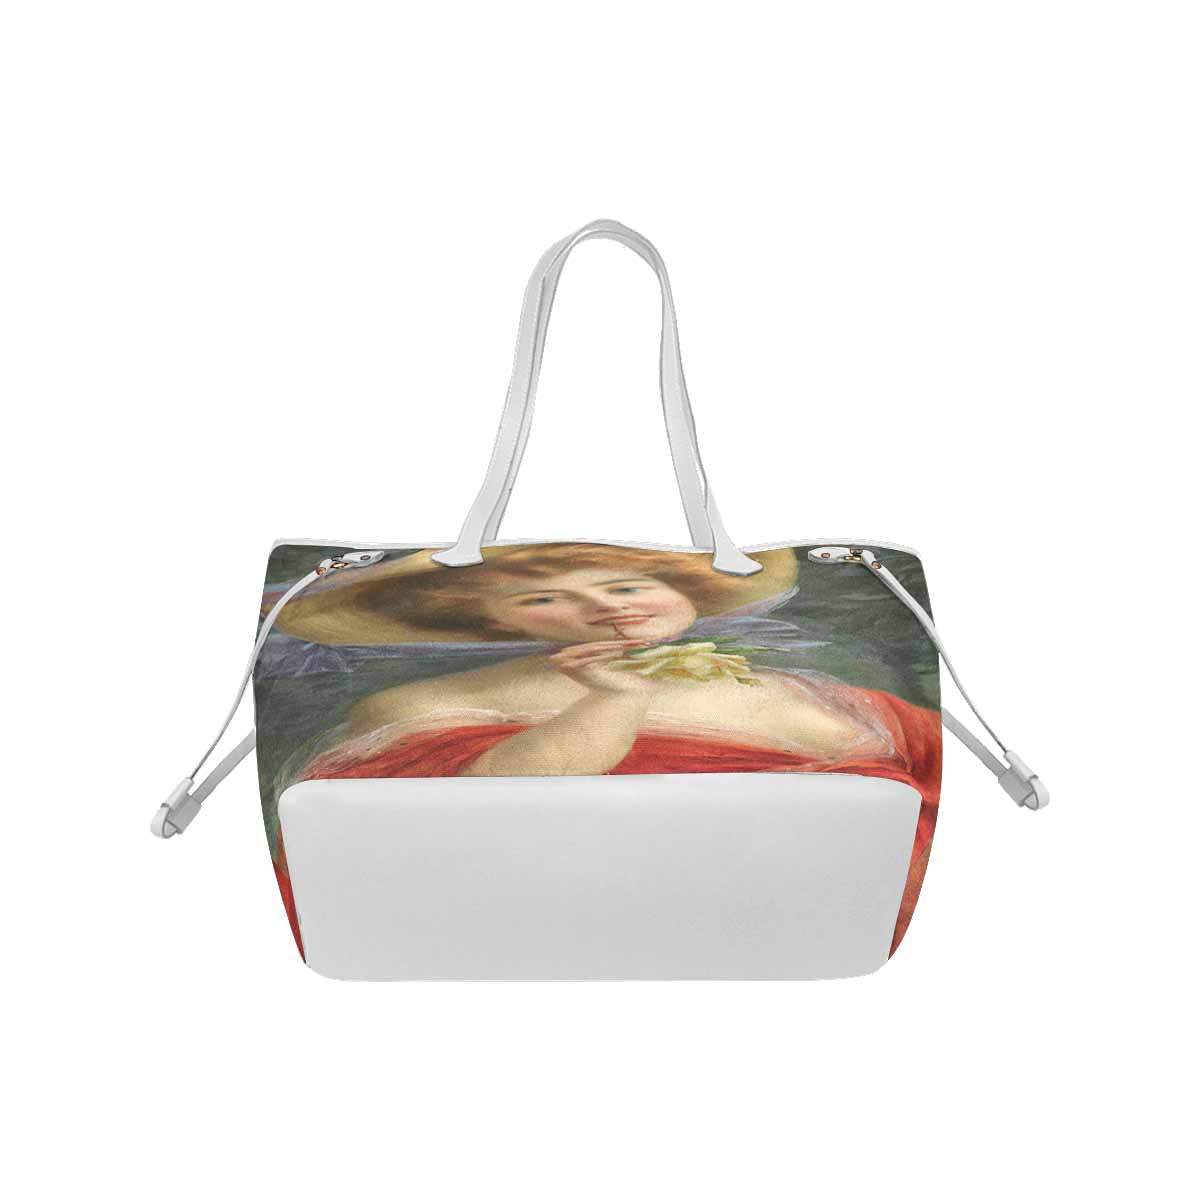 Victorian Lady Design Handbag, Model 1695361, Young Girl With A Rose, WHITE TRIM